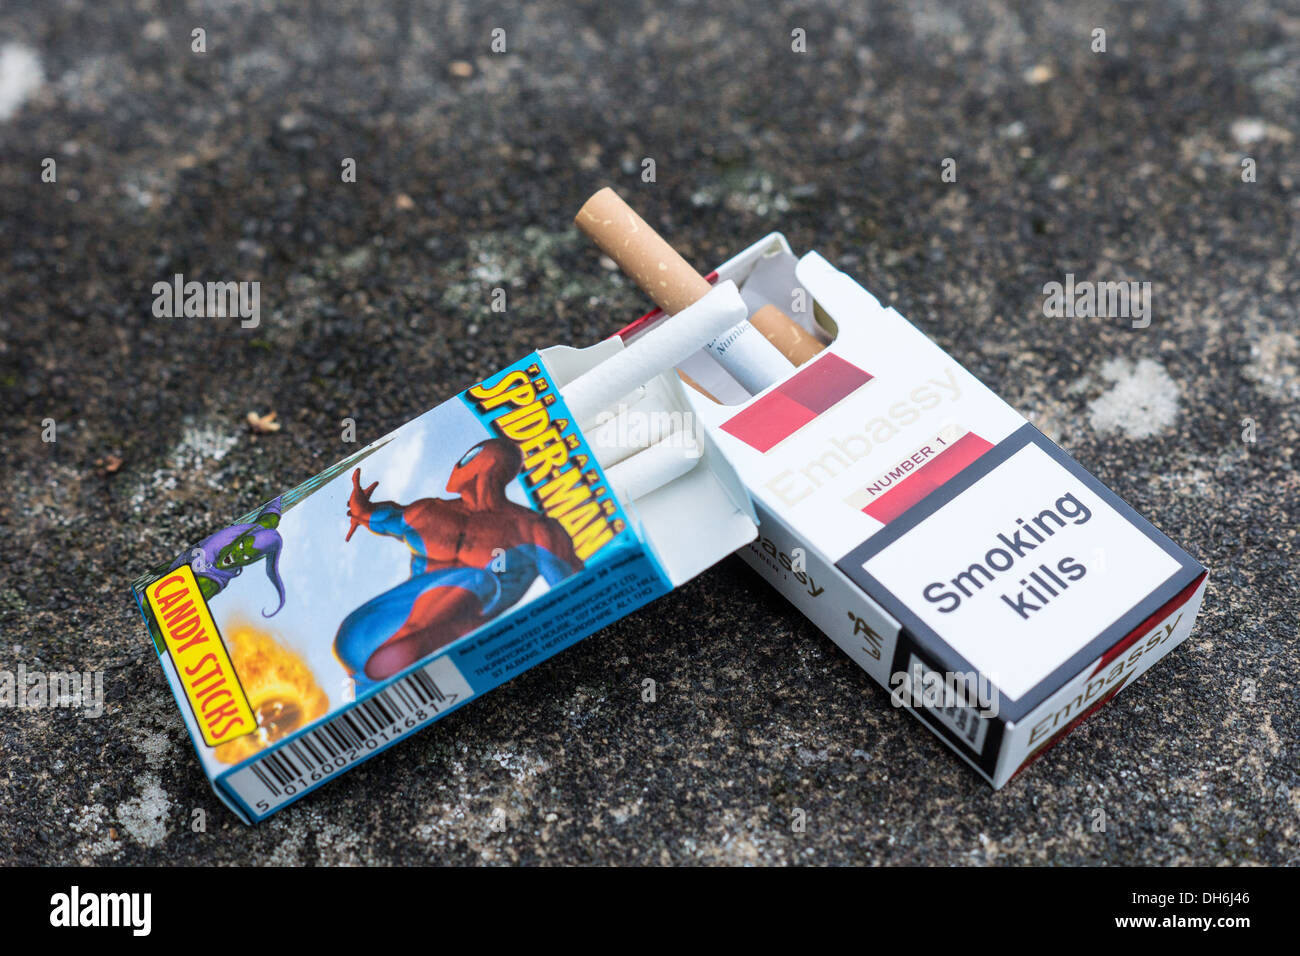 Packet Of 10 Cigarettes With Candy Sticks Stock Photo Alamy